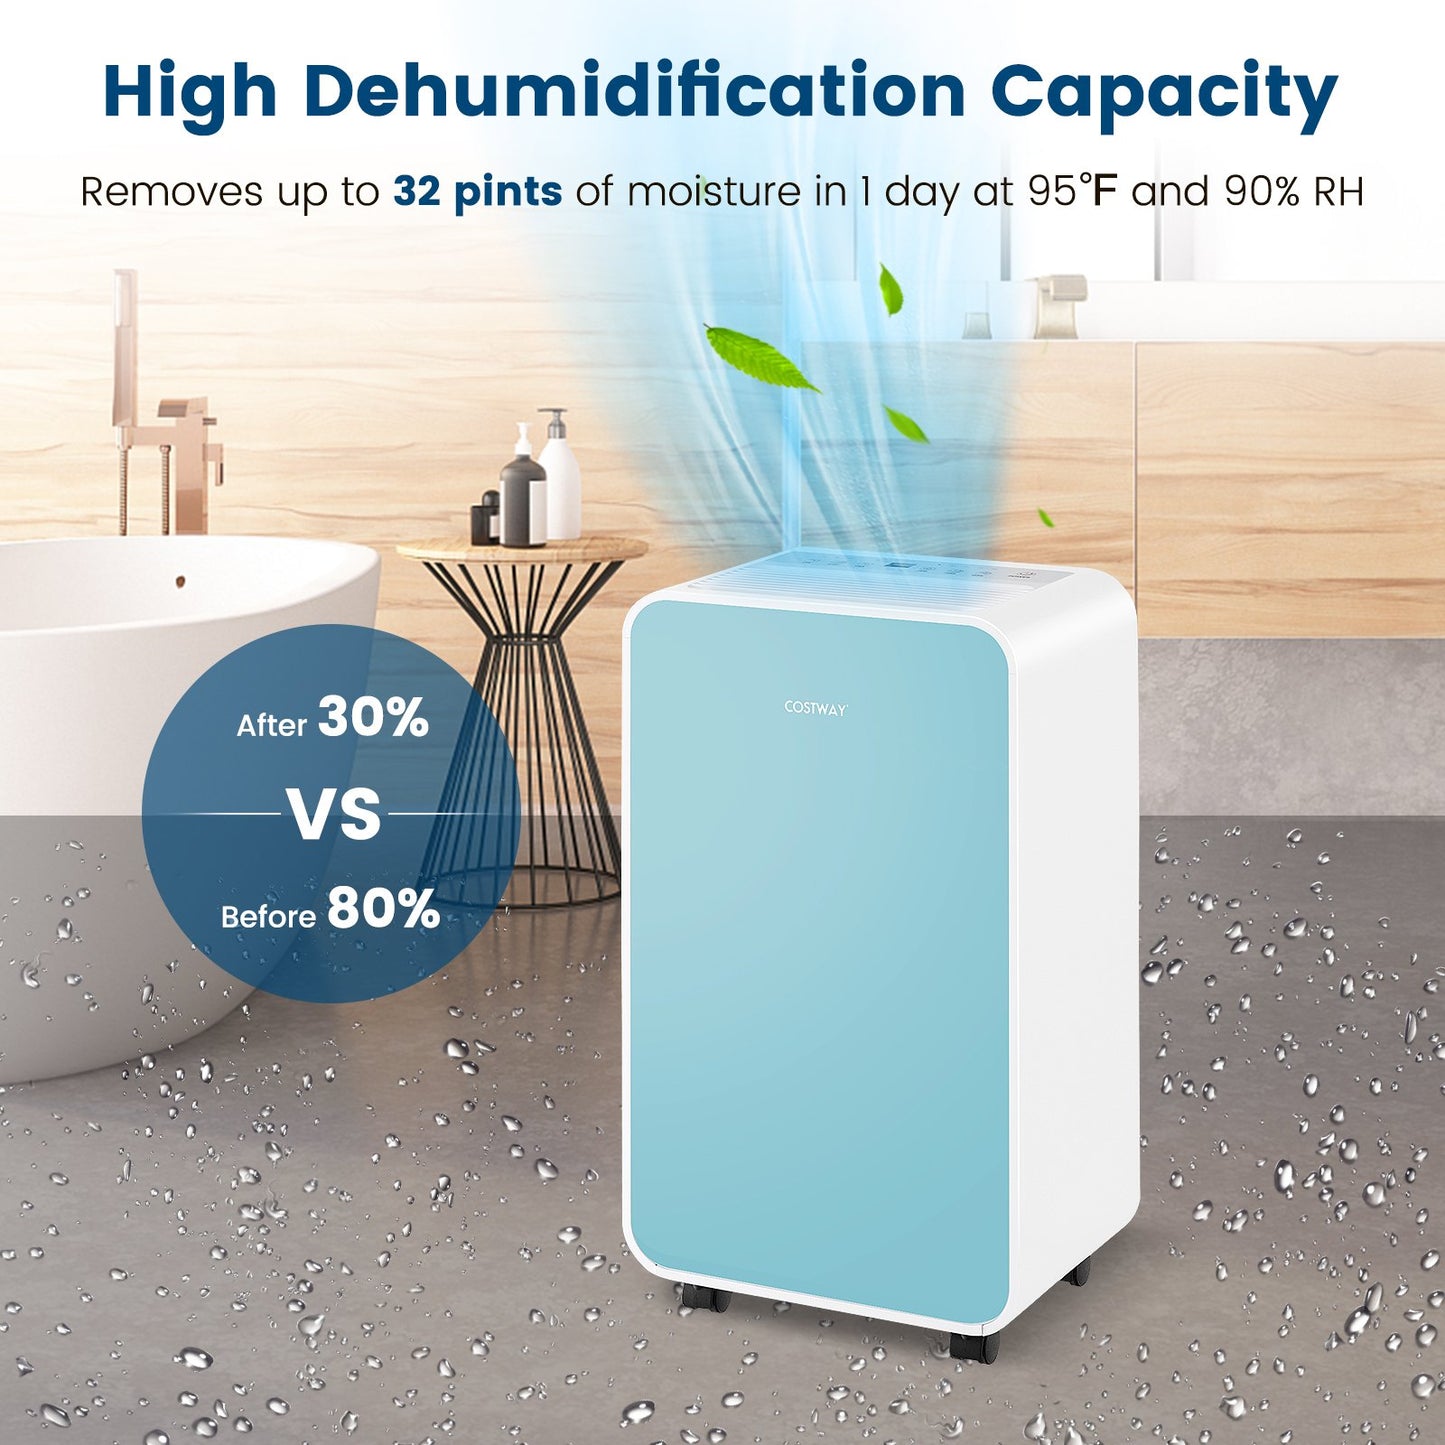 32 Pints/Day Portable Quiet Dehumidifier for Rooms up to 2500 Sq. Ft, Blue